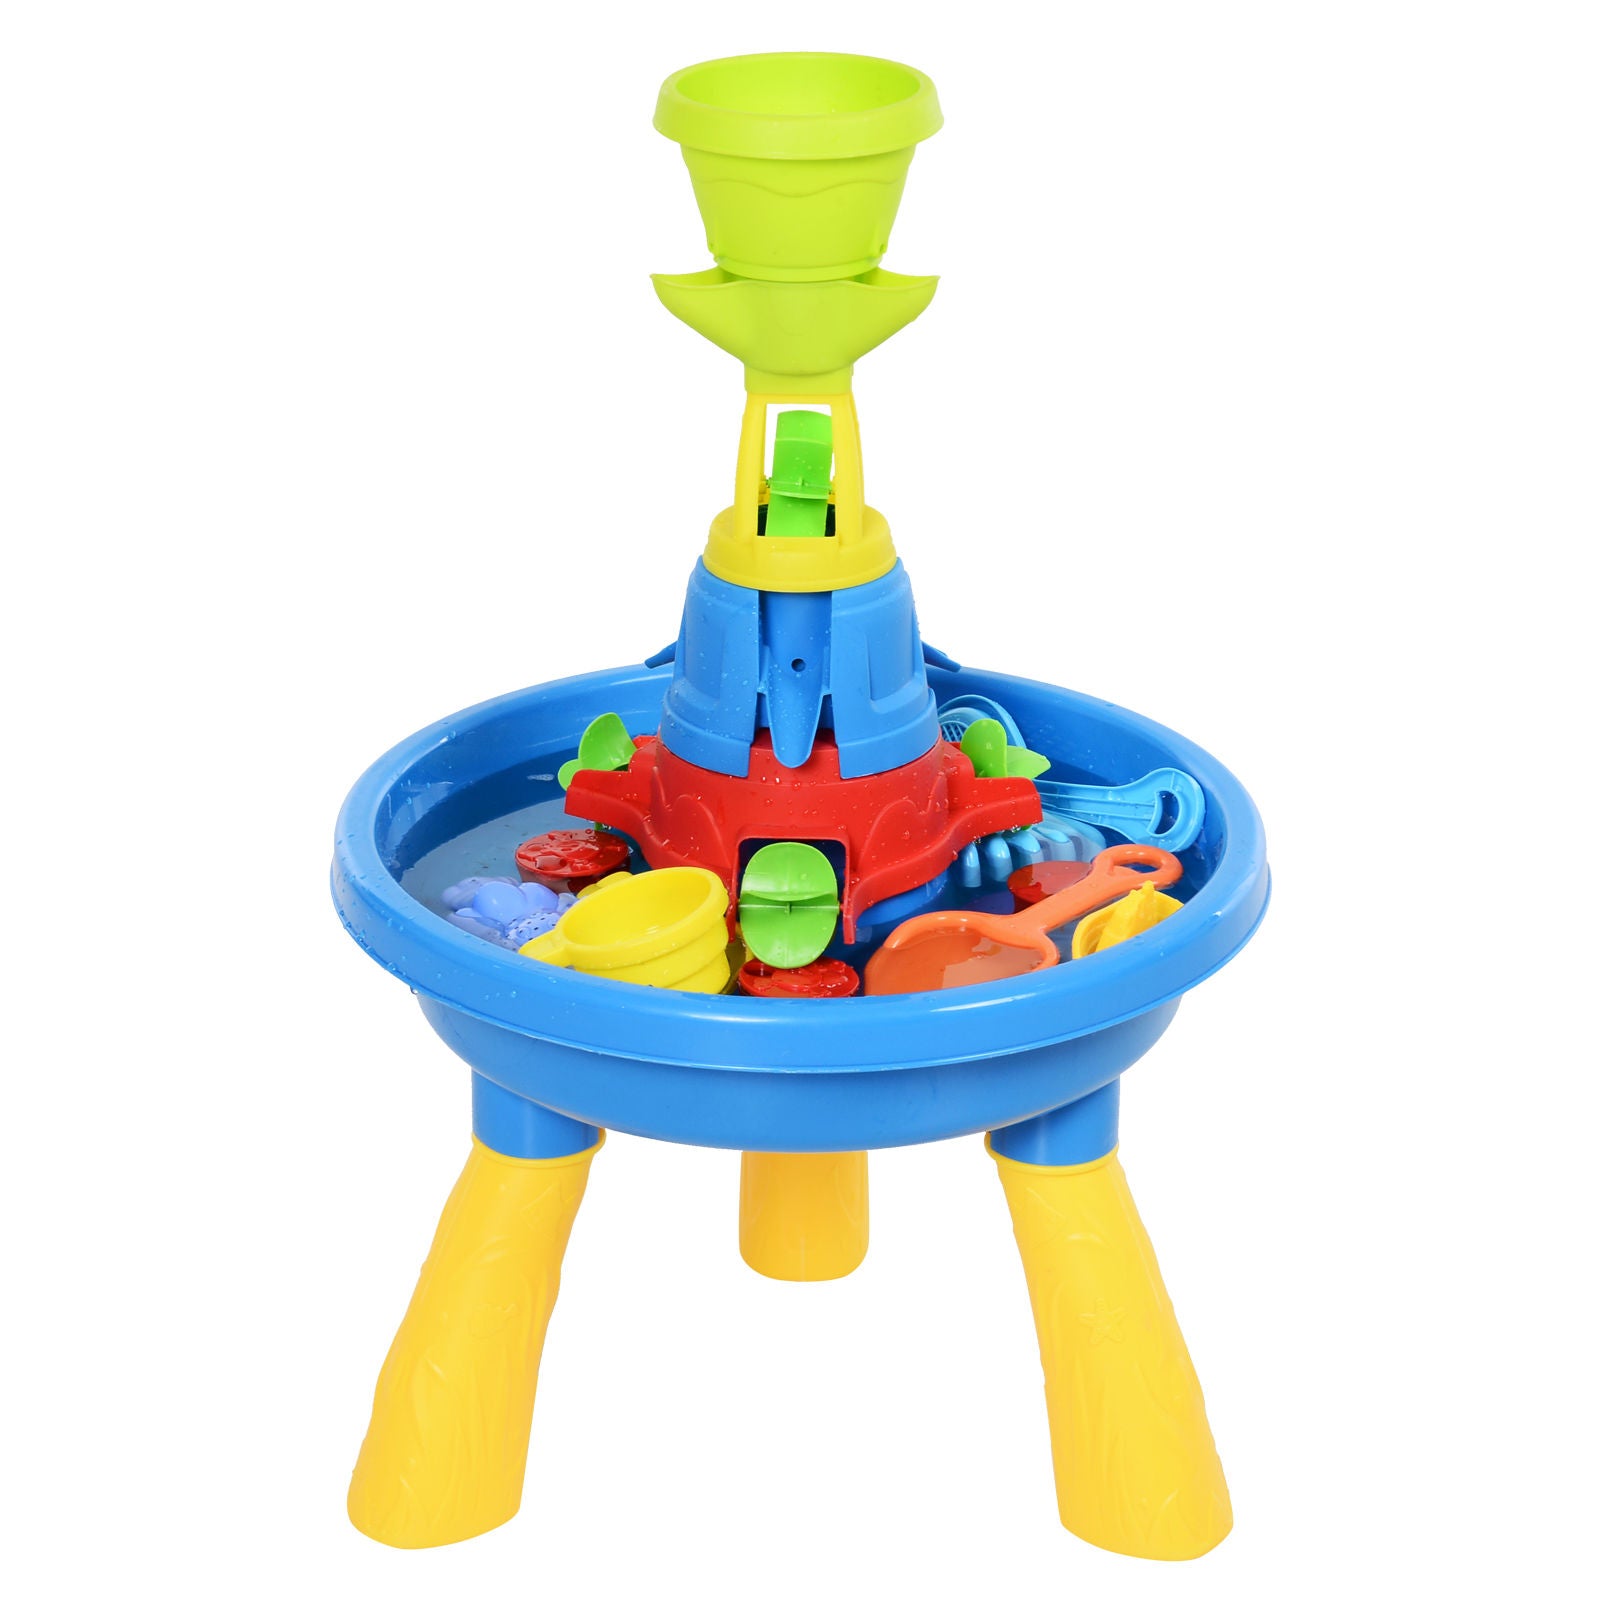 Nancy's Amos Point Sand and Water Play Table - Outdoor Toys